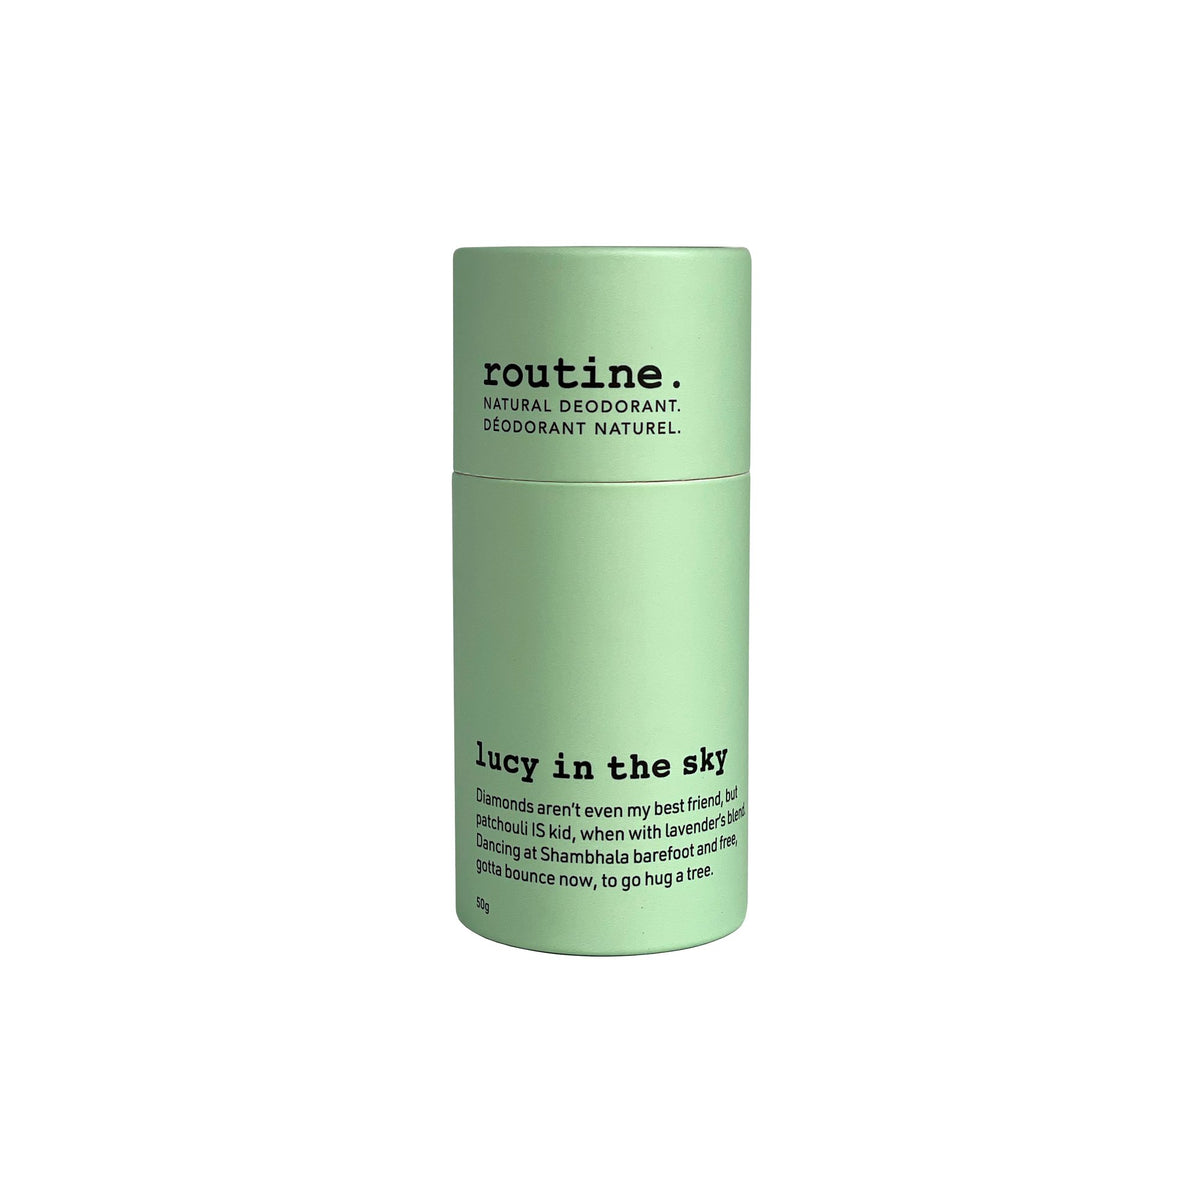 LUCY IN THE SKY 50G DEO STICK